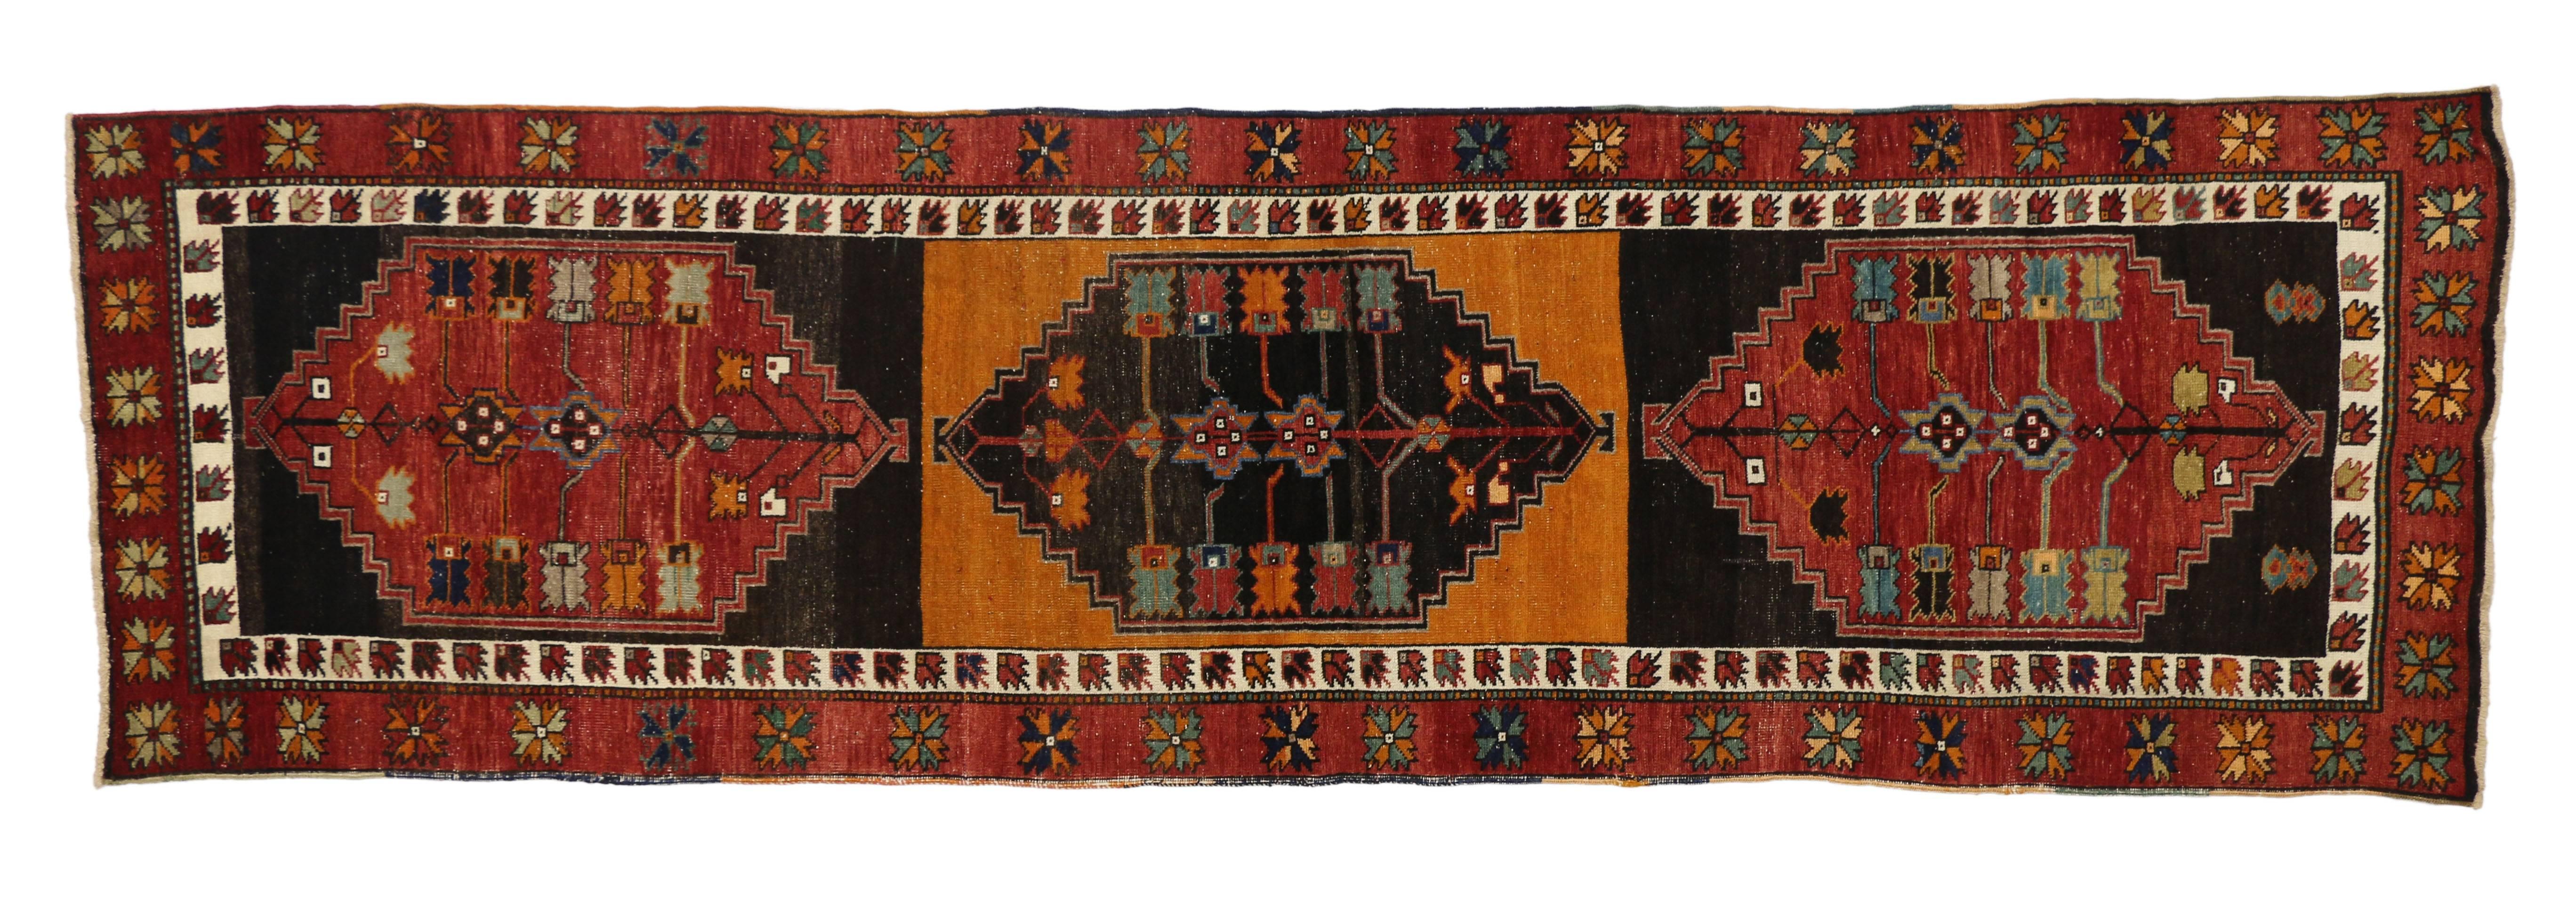 Vintage Turkish Oushak Runner with Mid-Century Modern Tribal Style For Sale 5